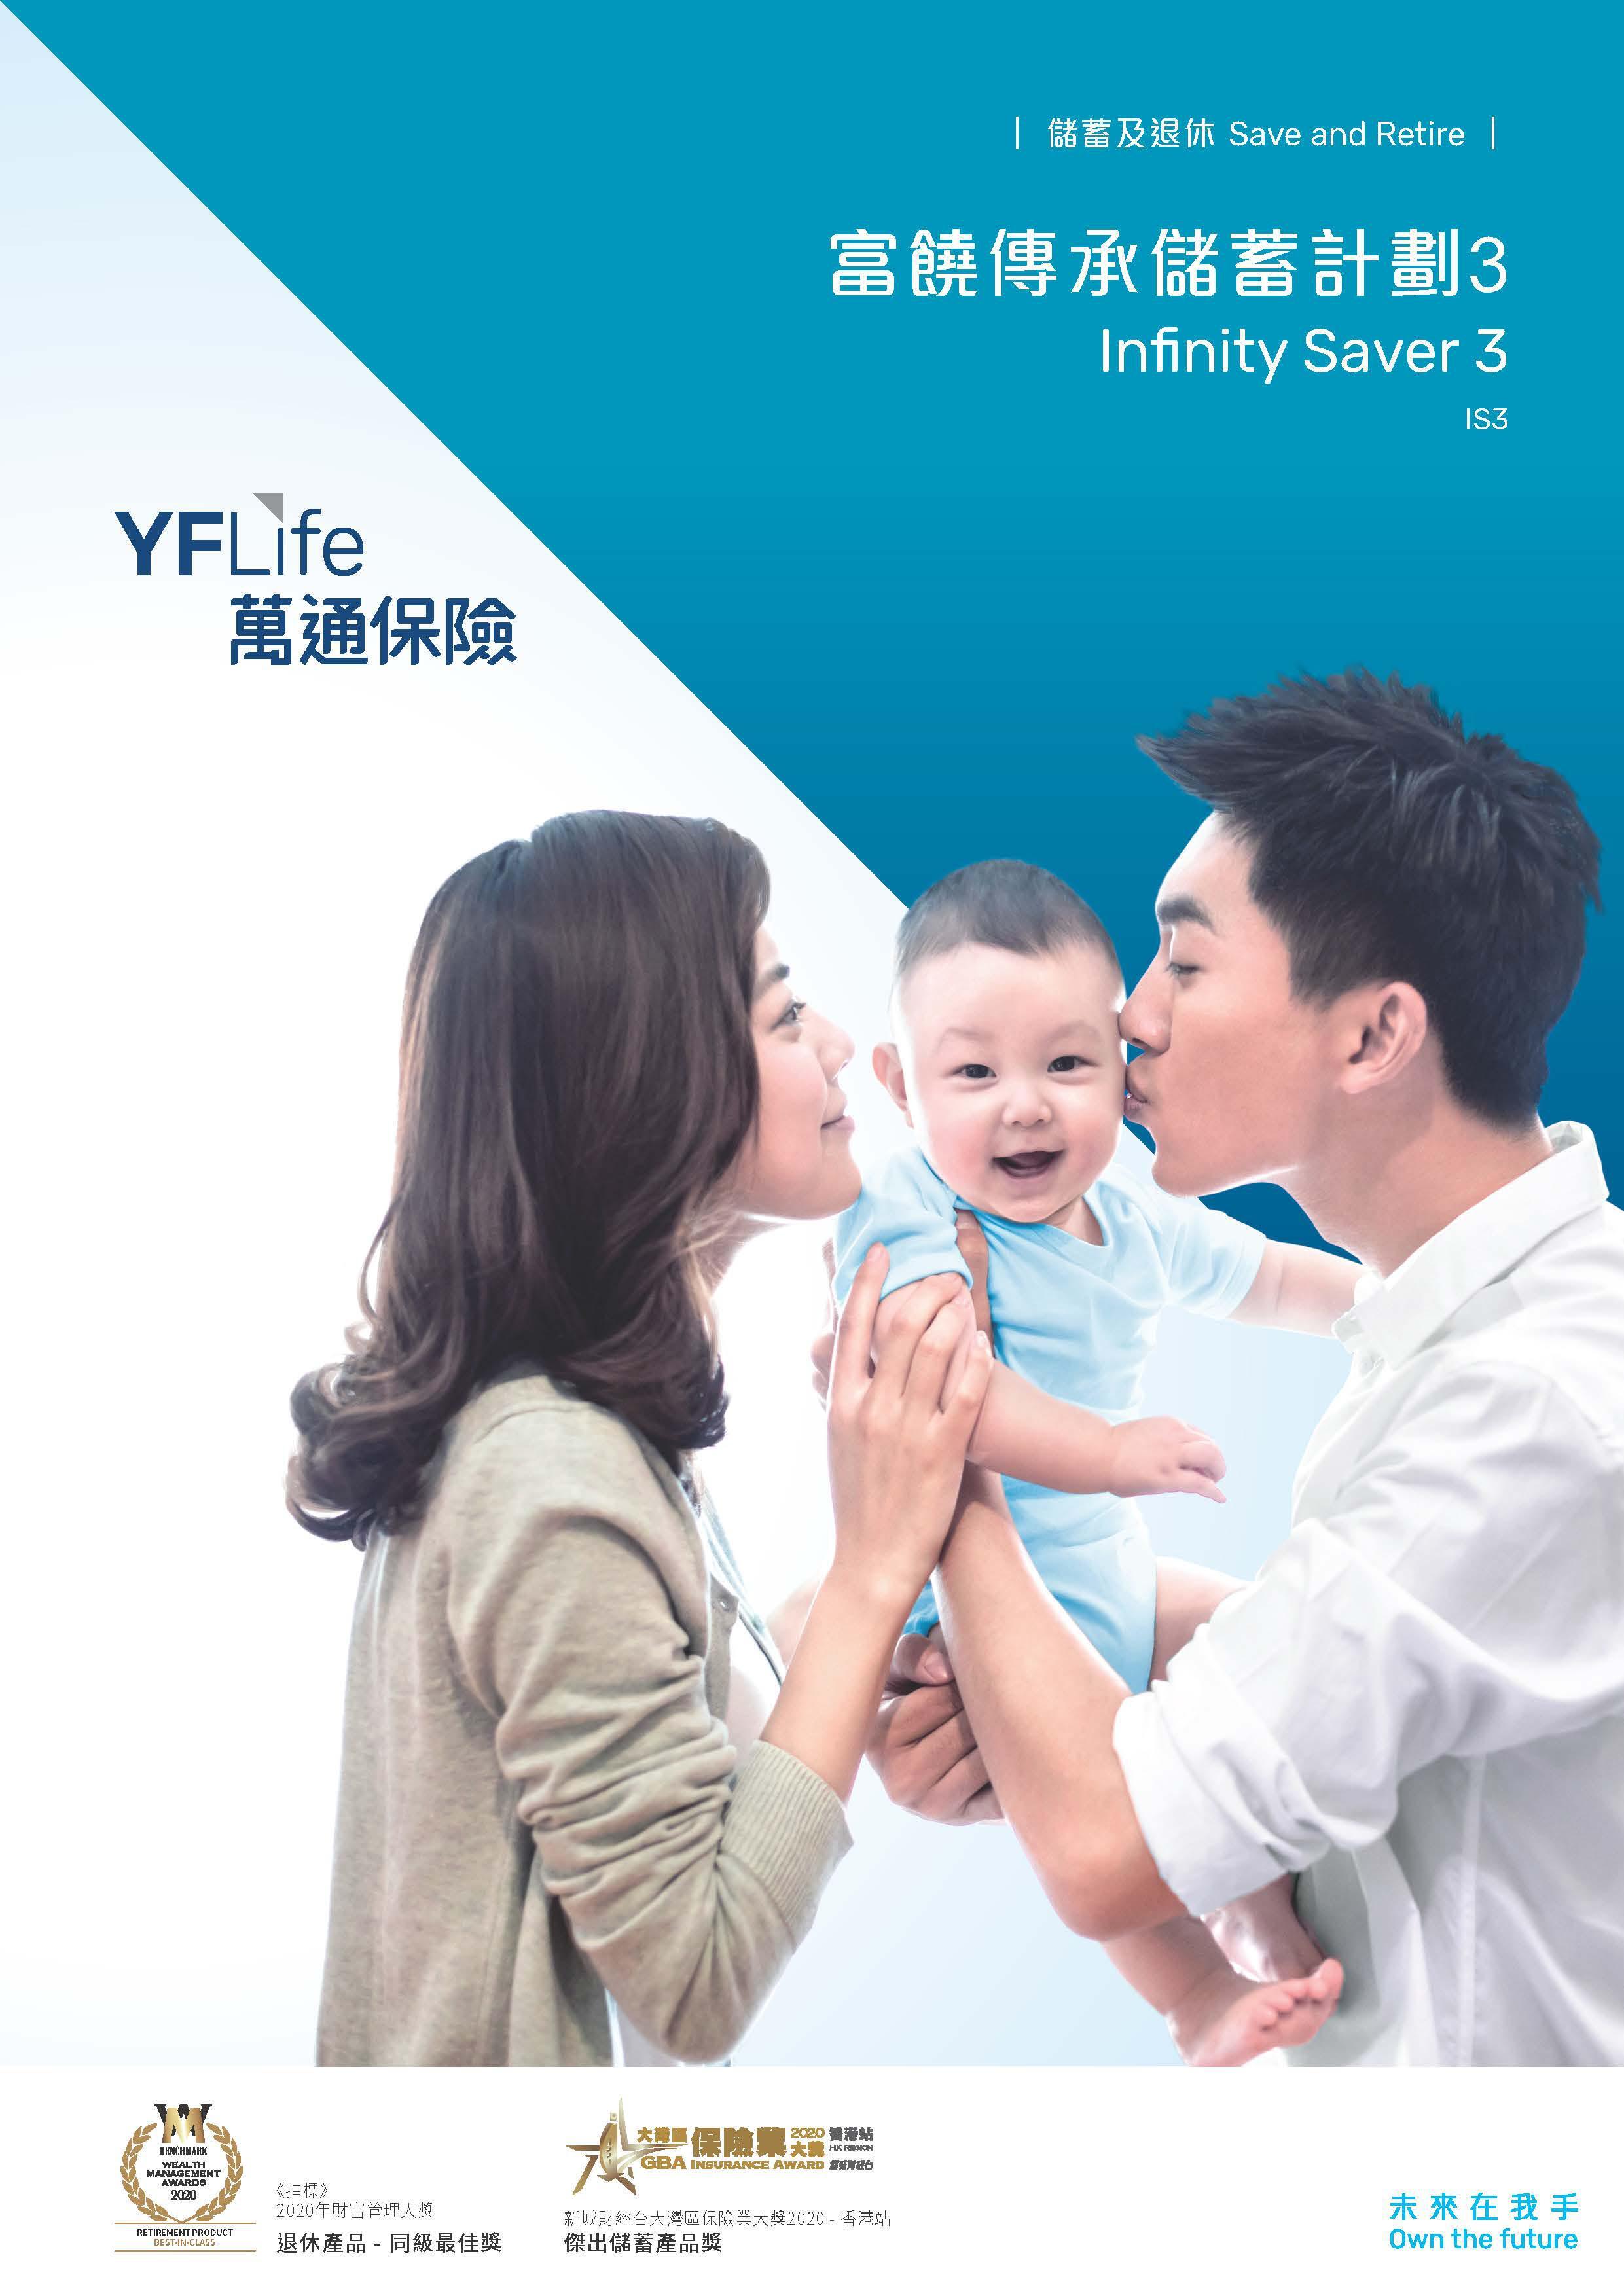 YF Life launches mid-to-long-term participating insurance plan “Infinity Saver 3”, offering higher potential returns.